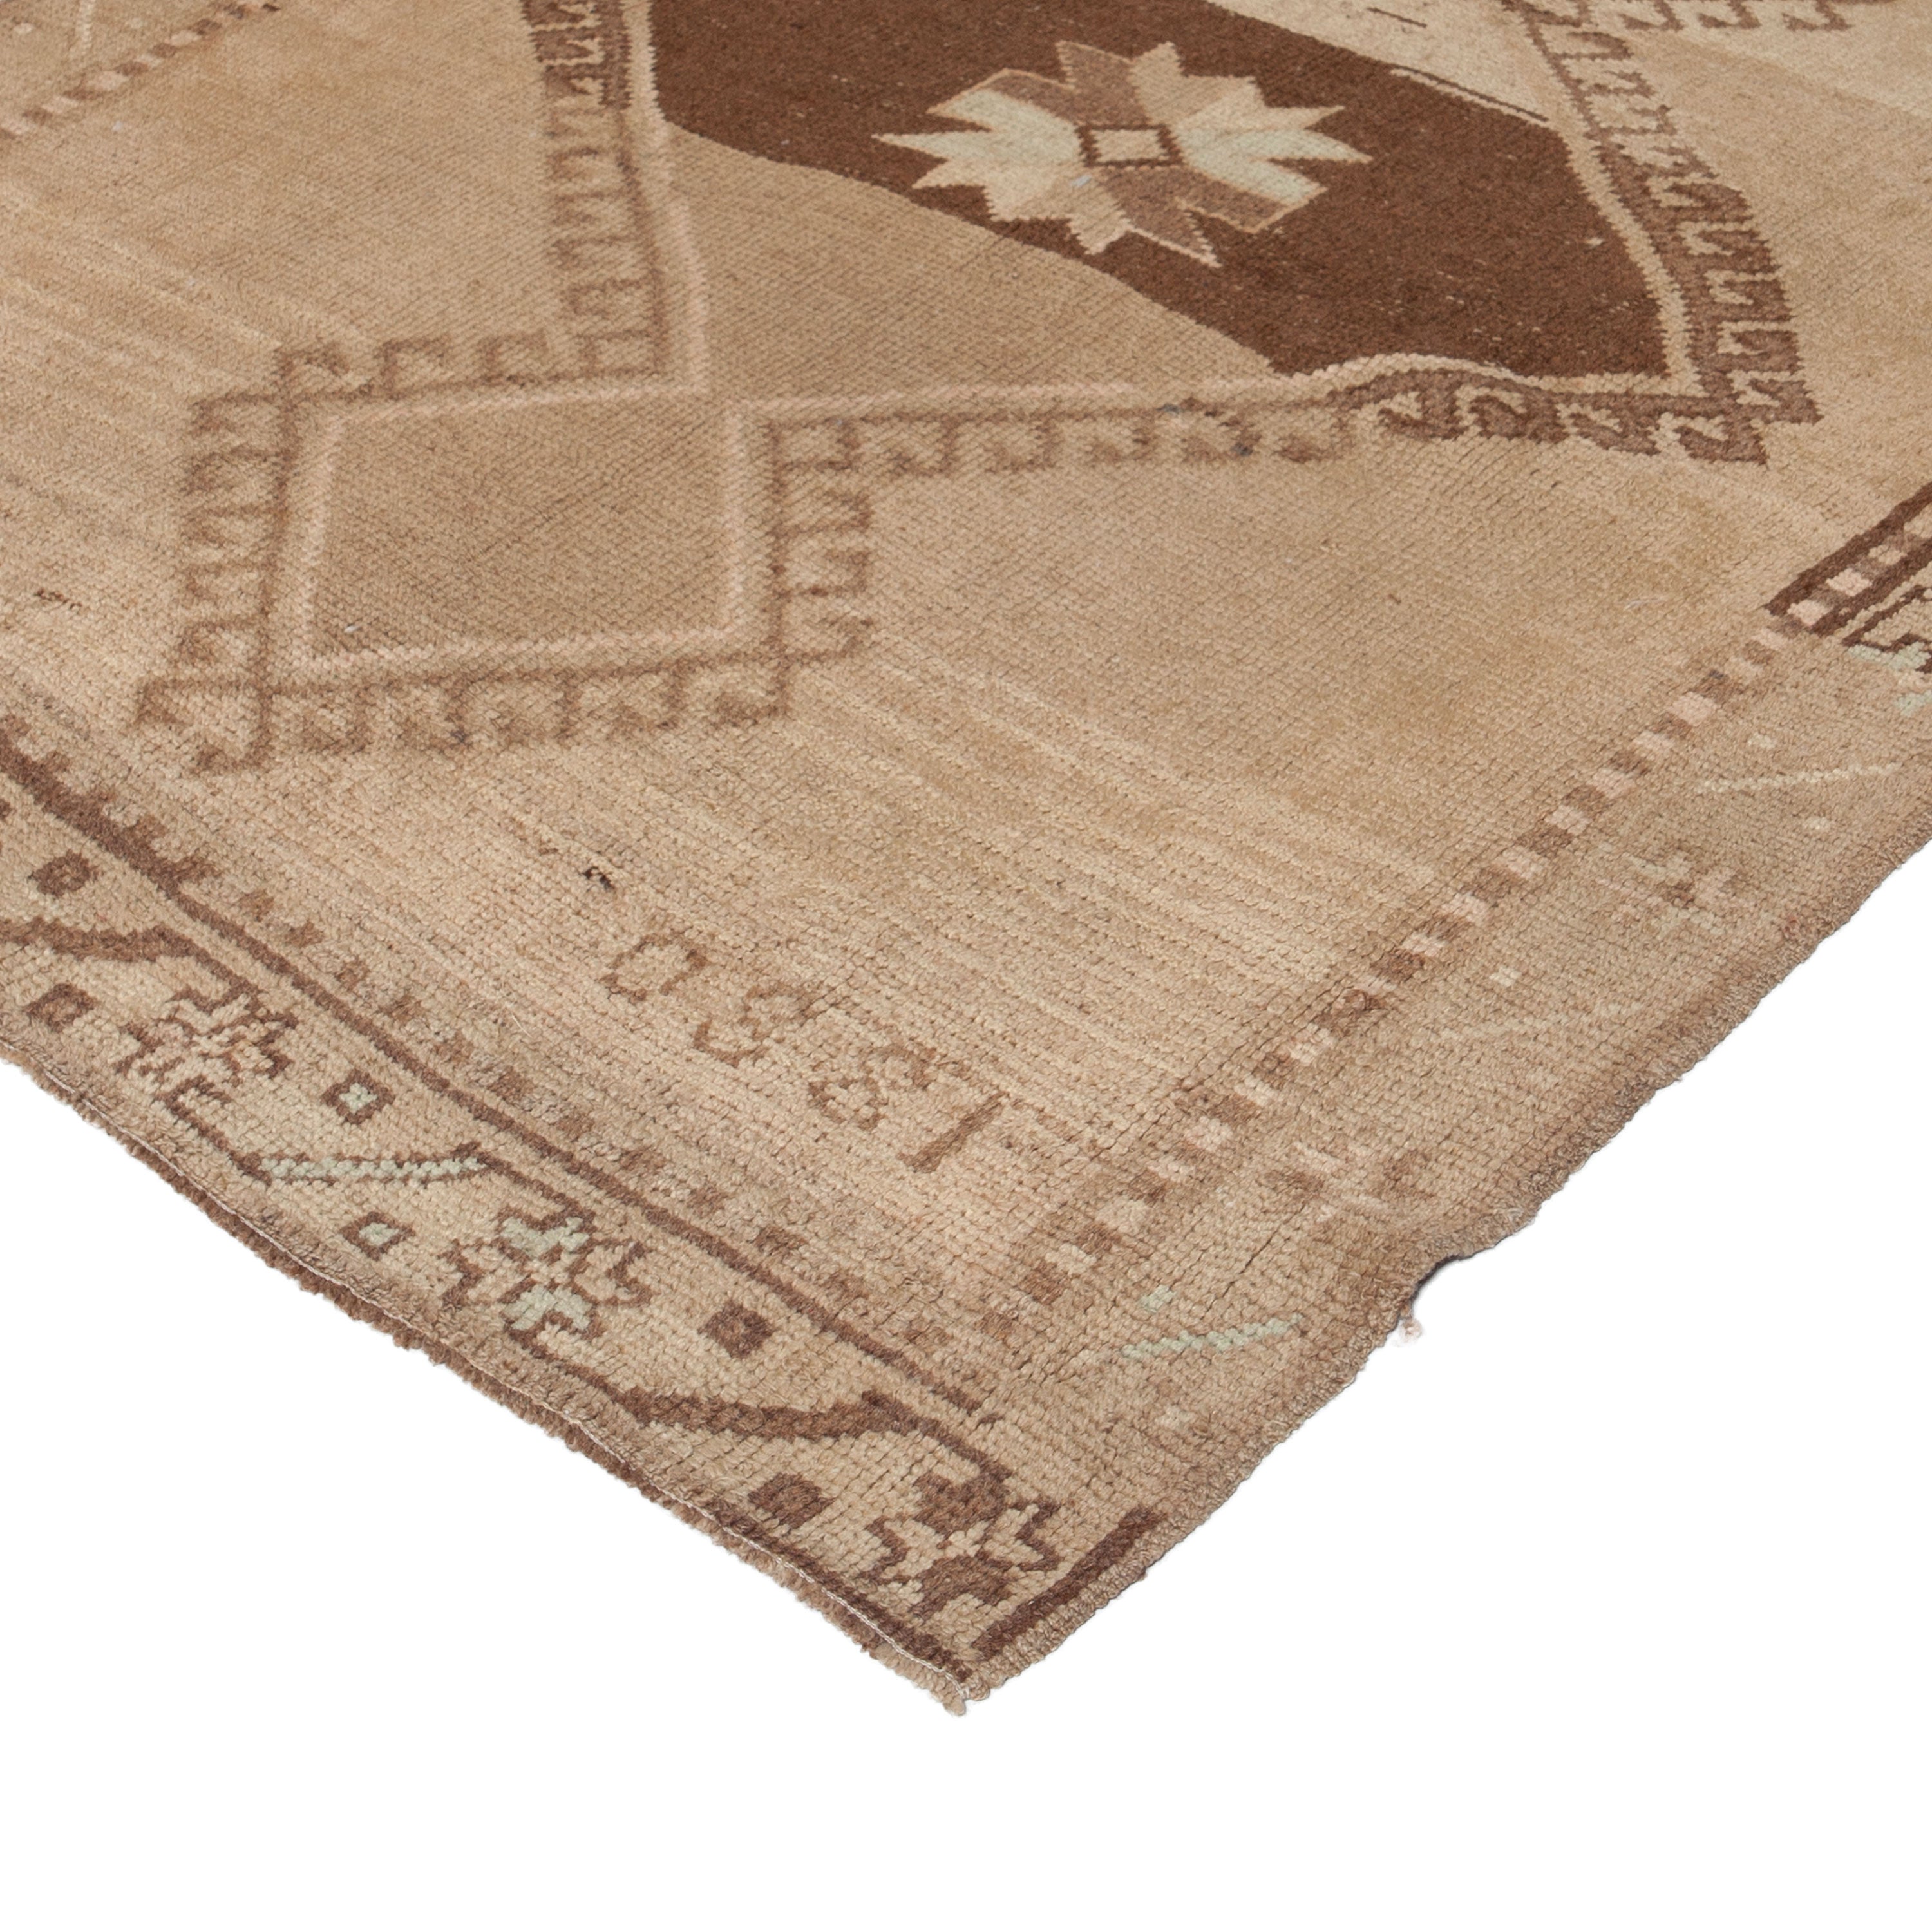 Brown Traditional Wool Runner - 3'11" x 9'6"